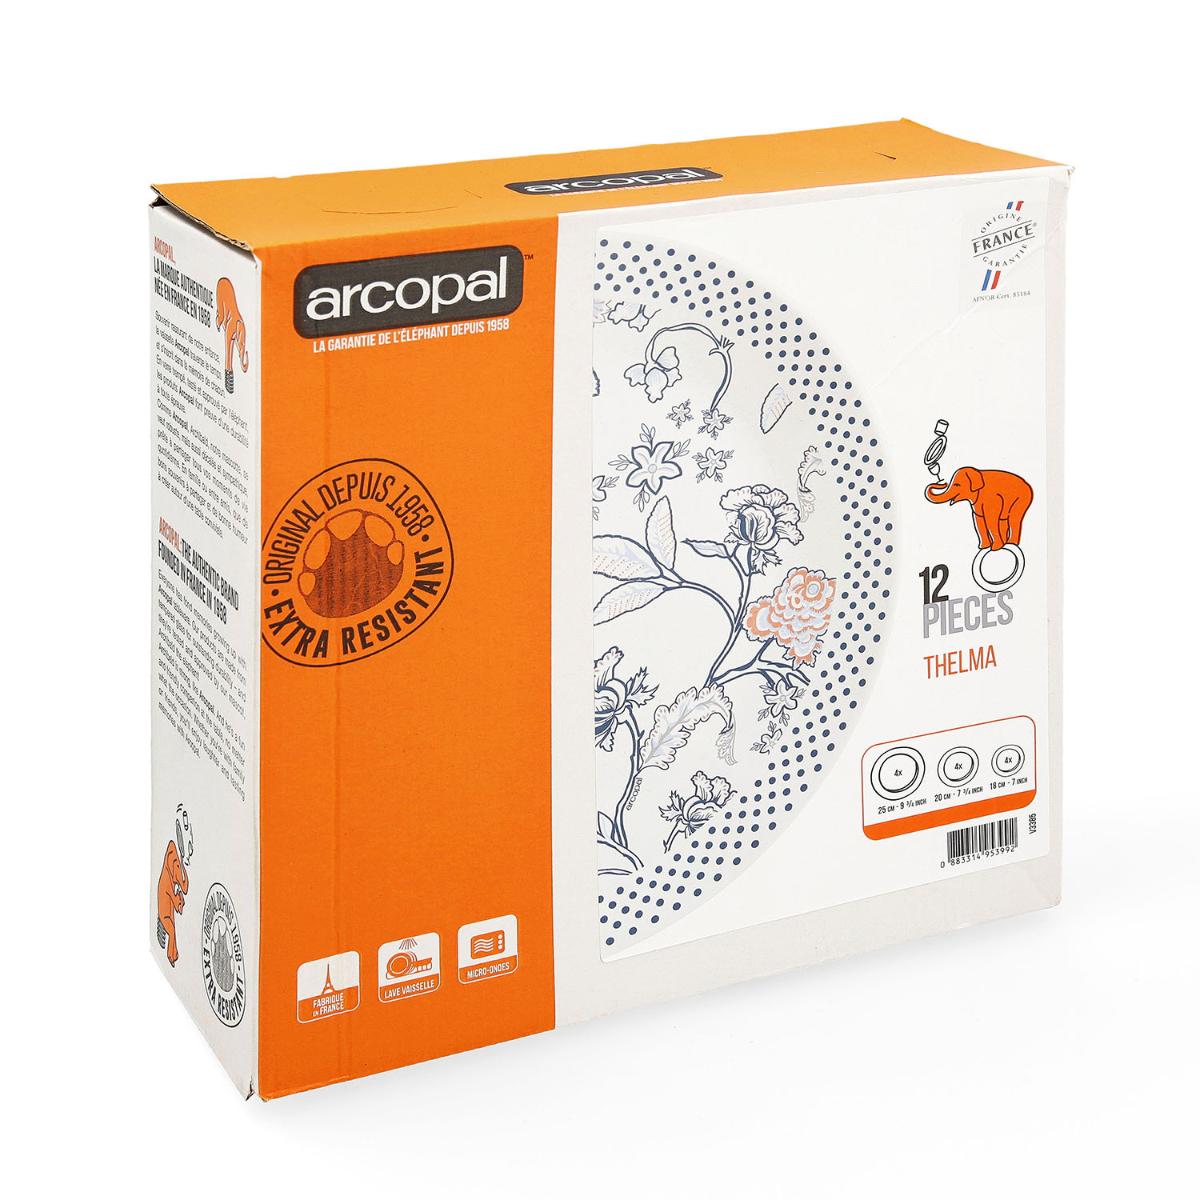 OPAL DINNER SET, Arcopal, Brands, Common, Products